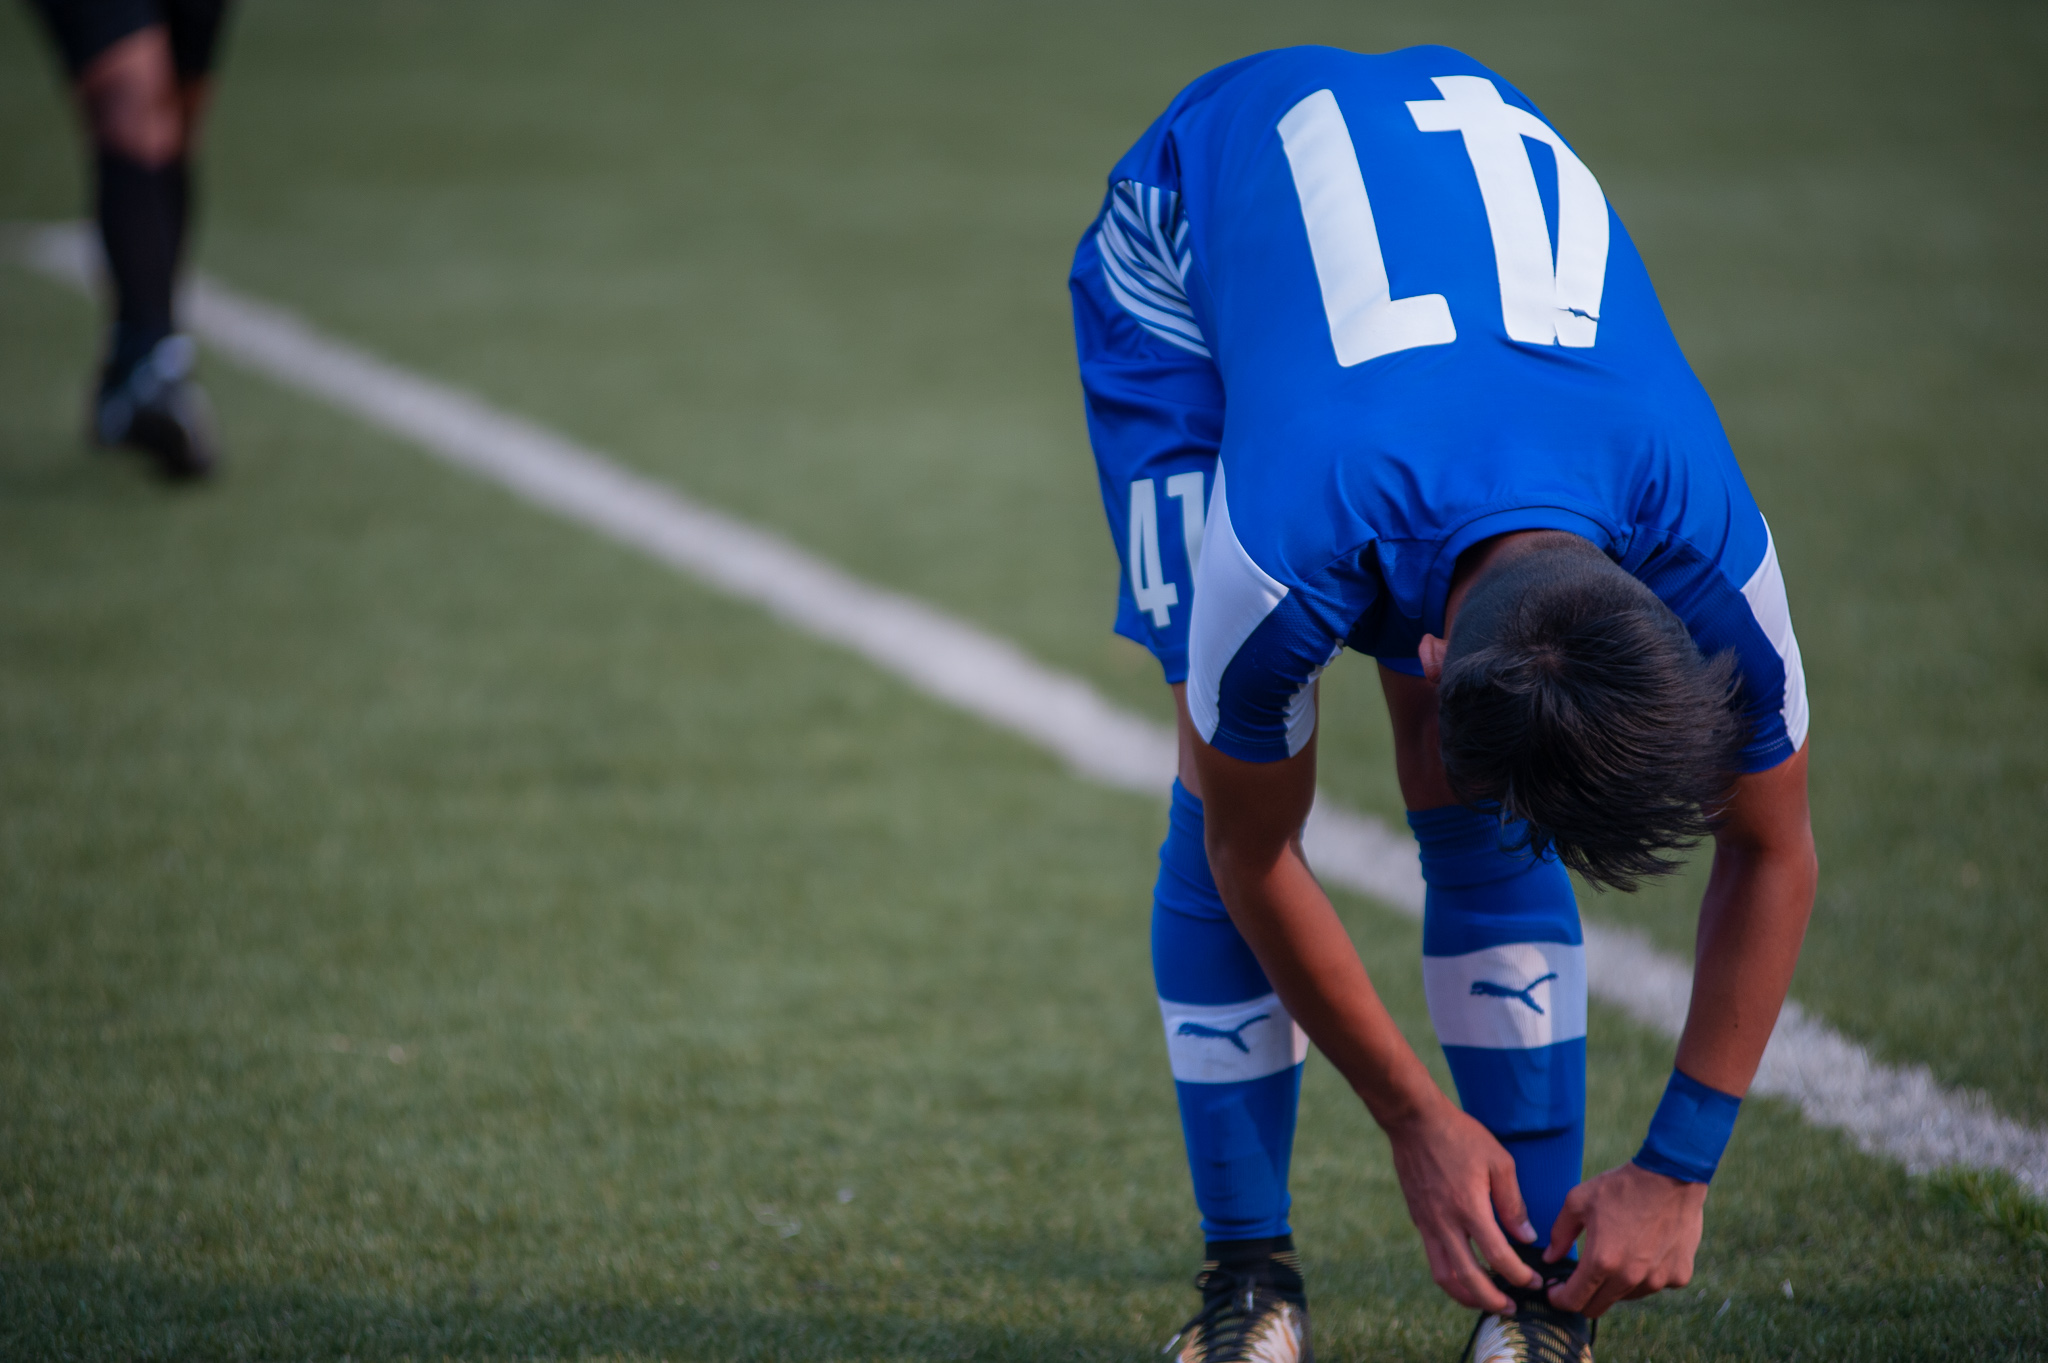 Naorem Roshan, the number 47 of Bengaluru FC, catches his breath and ties his shoelaces after the ball goes out for a goal kick.